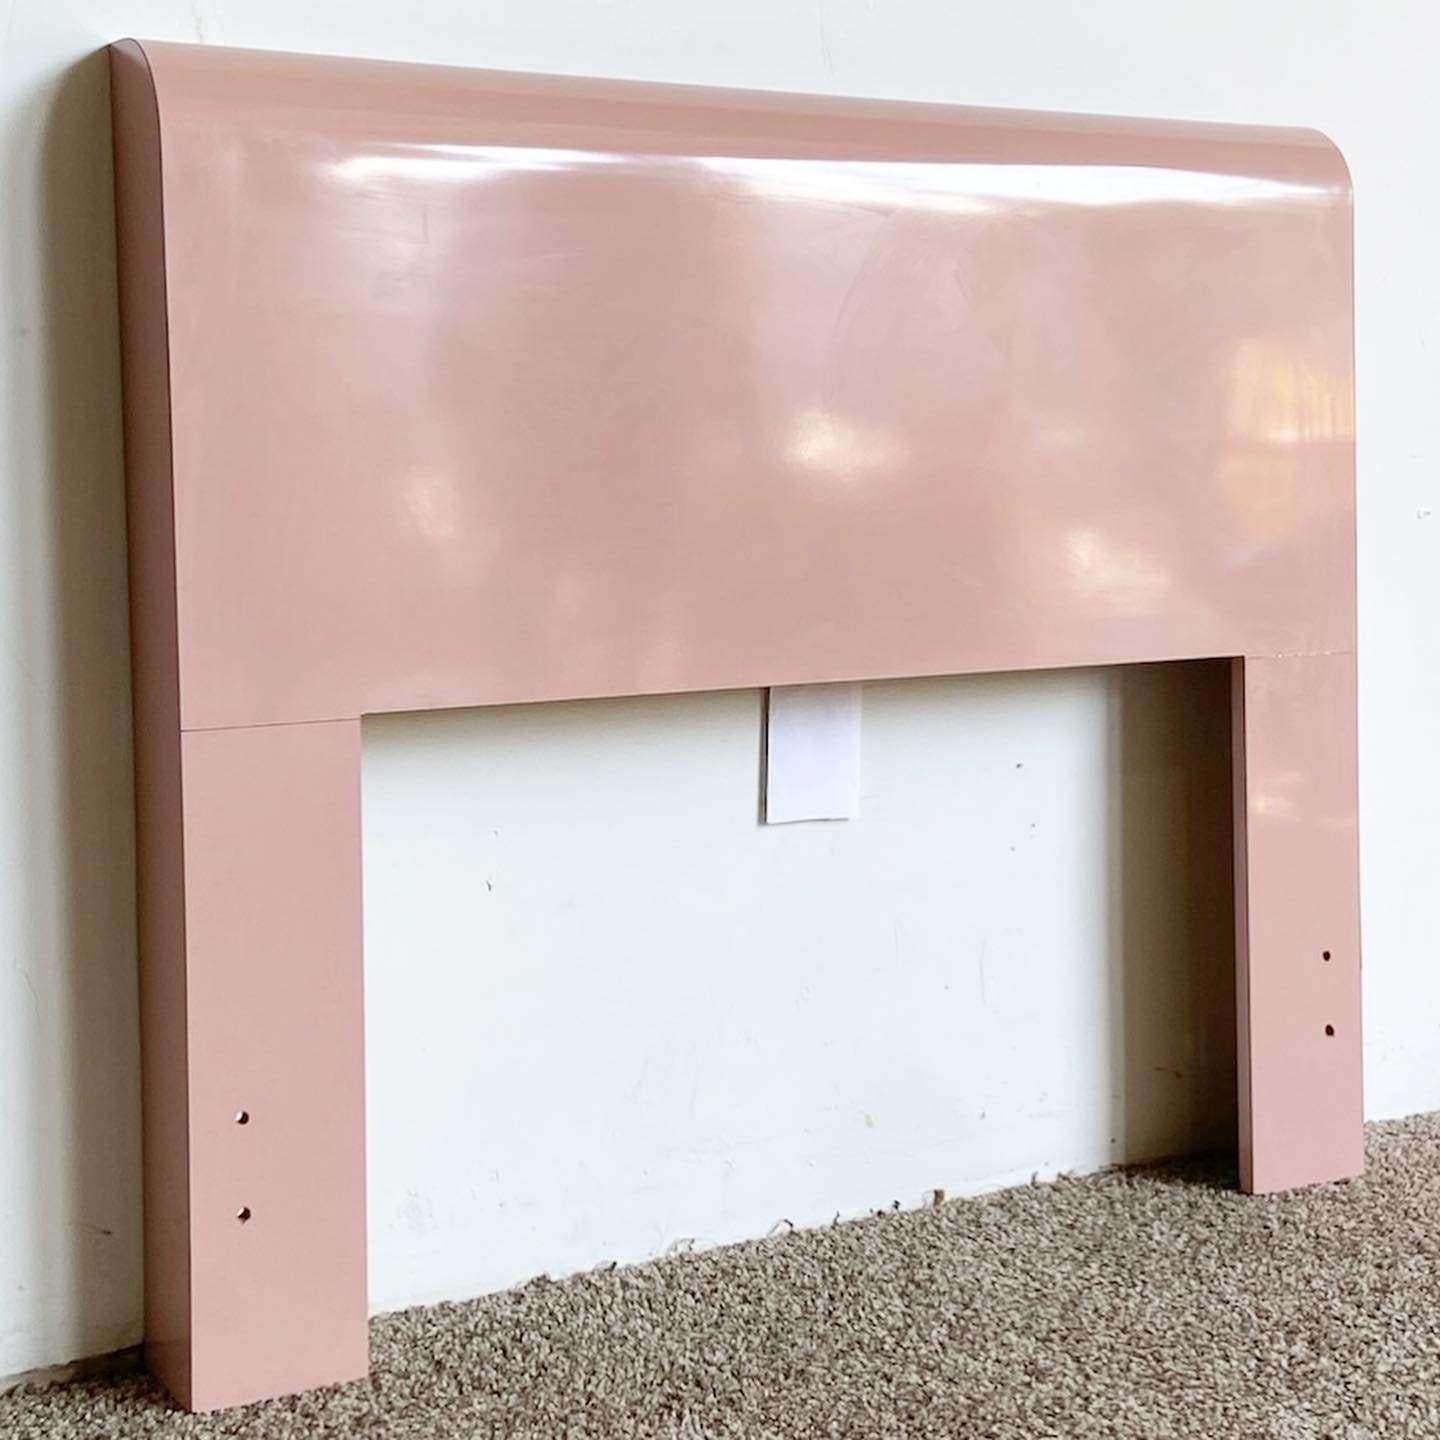 Exceptional vintage postmodern twin size waterfall headboard. Features a pink lacquer laminate.
